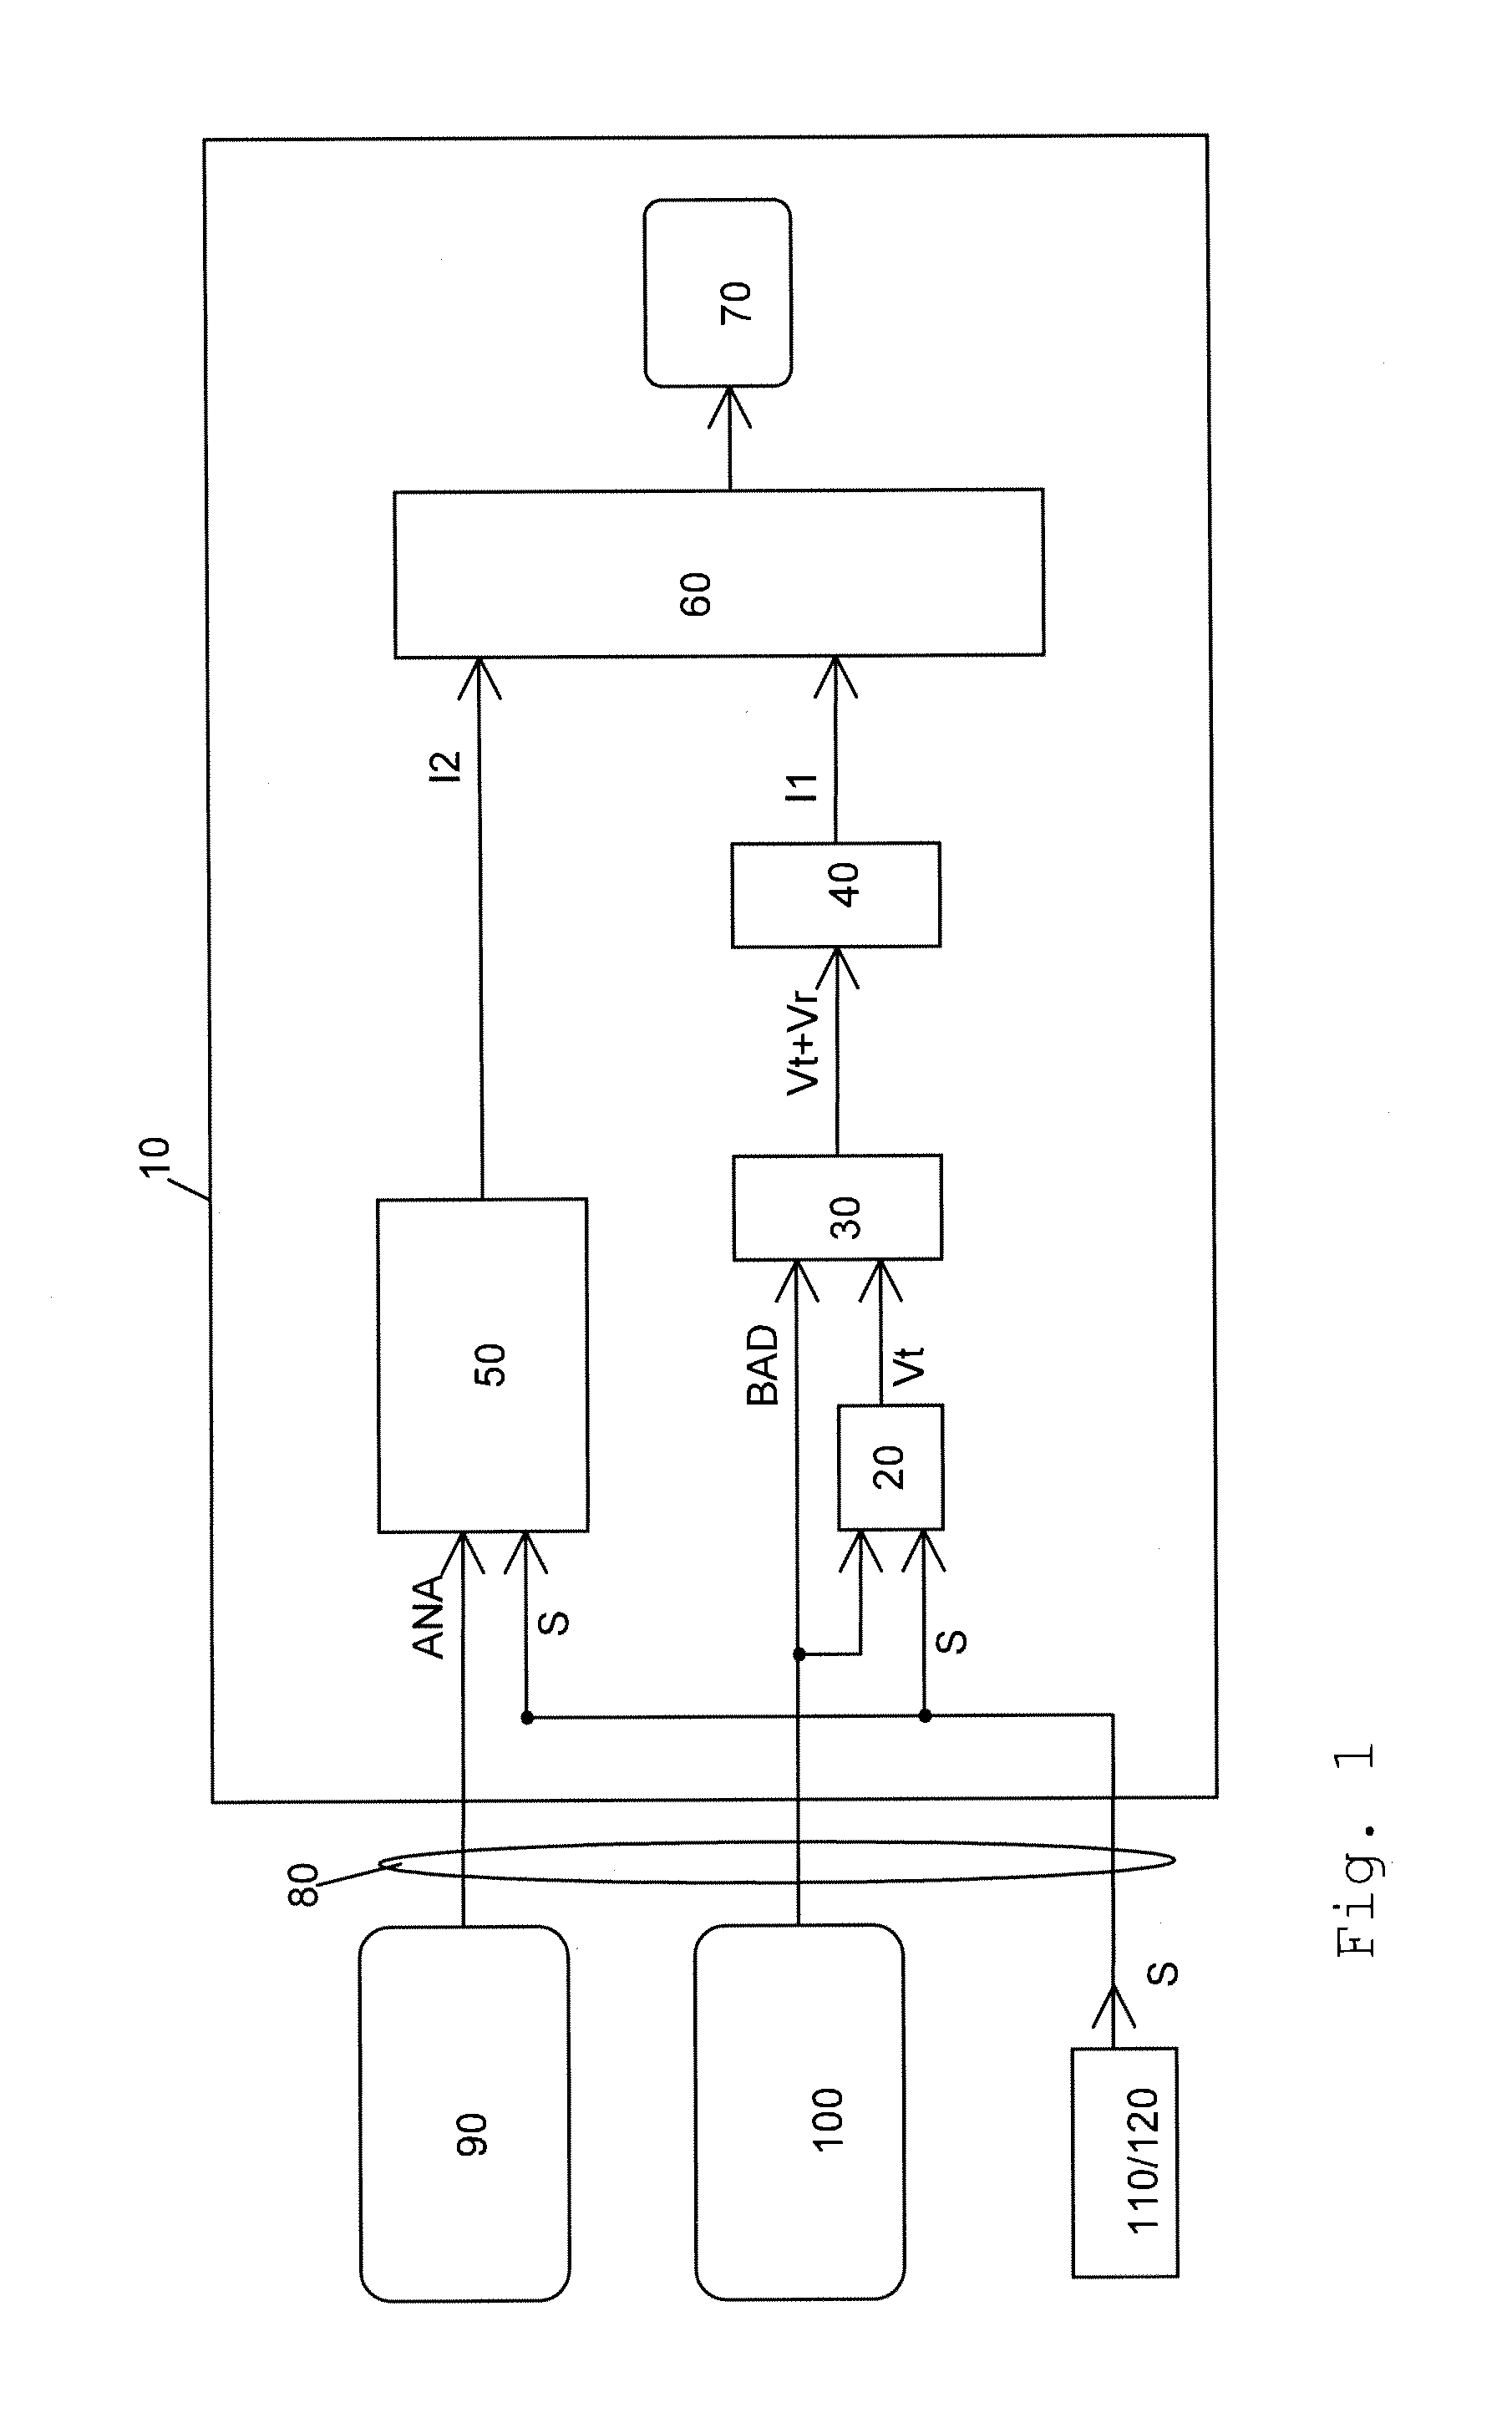 Method and device for visualizing human or animal brain segments